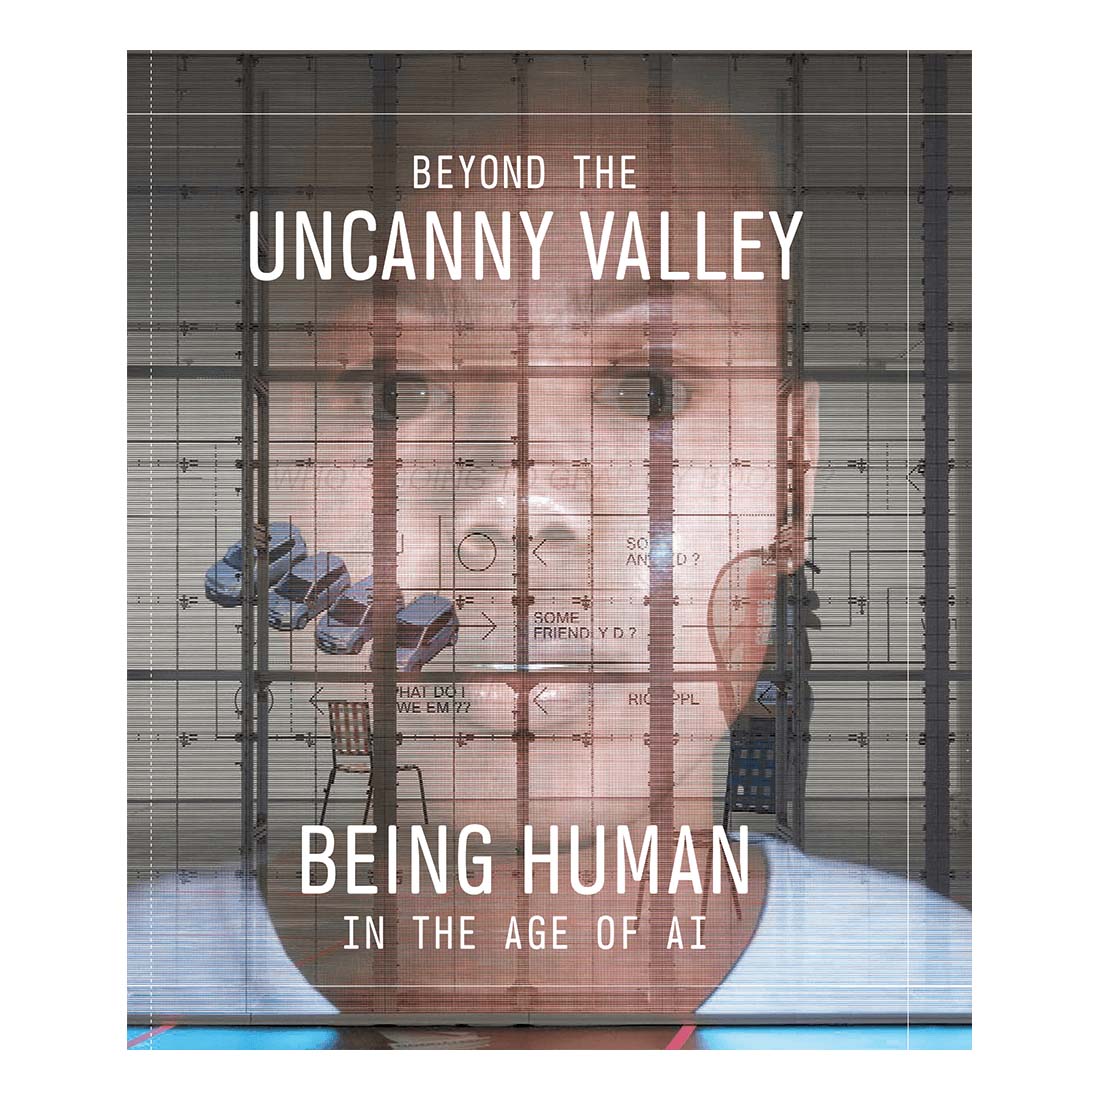 Beyond The Uncanny Valley: Being Human in the Age of AI